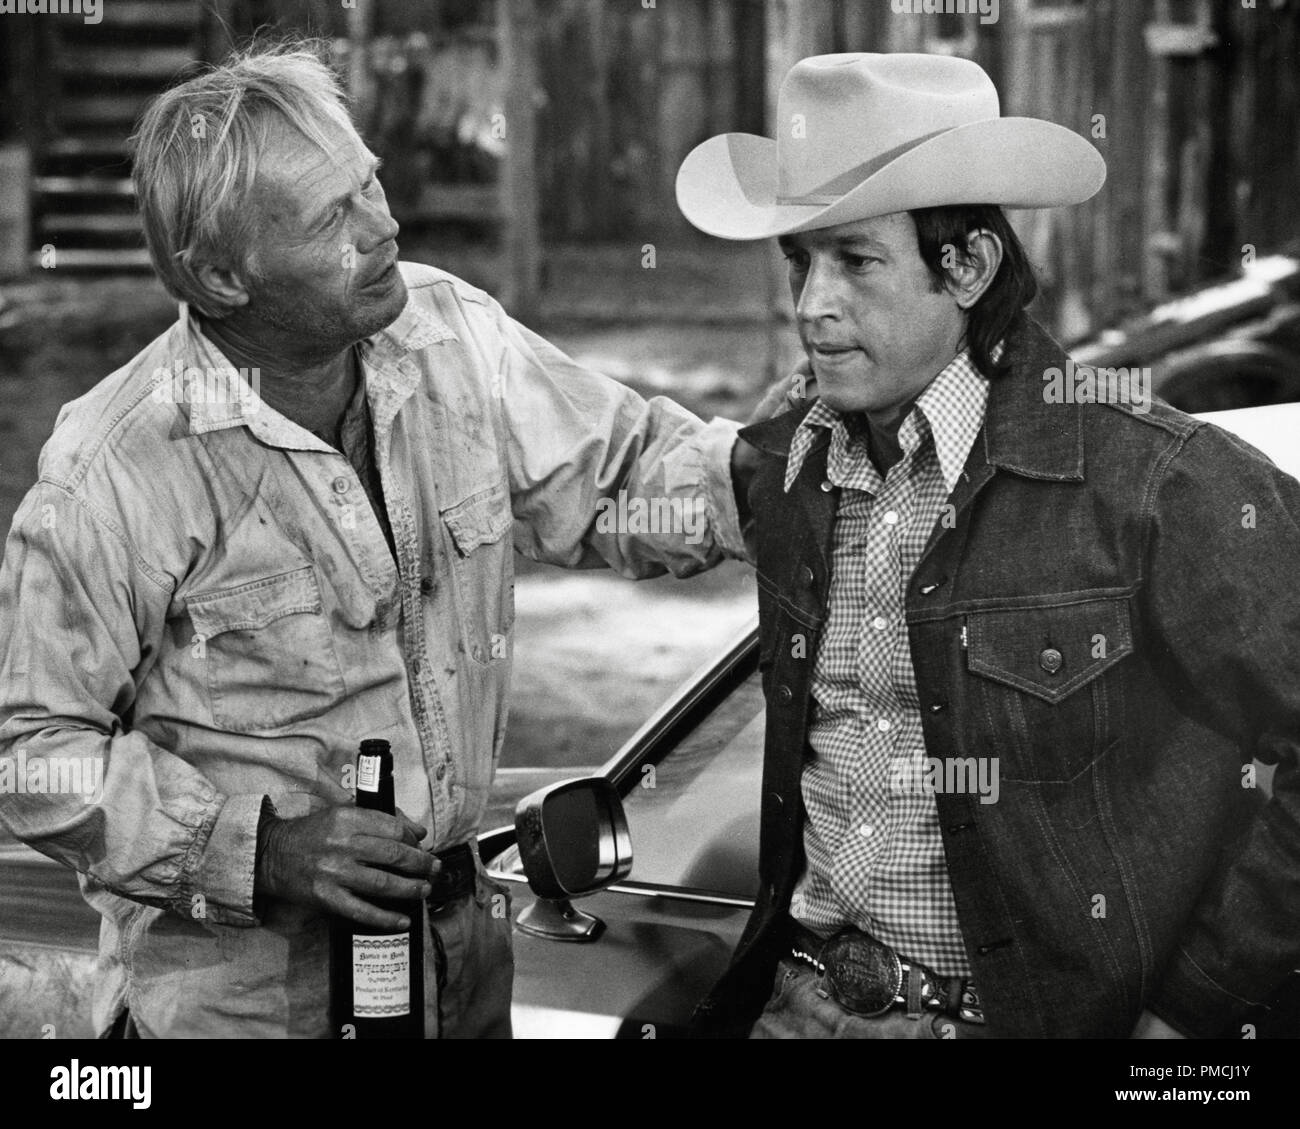 Richard Widmark, Frederic Forrest,  'When the Legends Die'  (1972) 20th Century Fox   File Reference # 33650 161THA  For Editorial Use Only -  All Rights Reserved Stock Photo